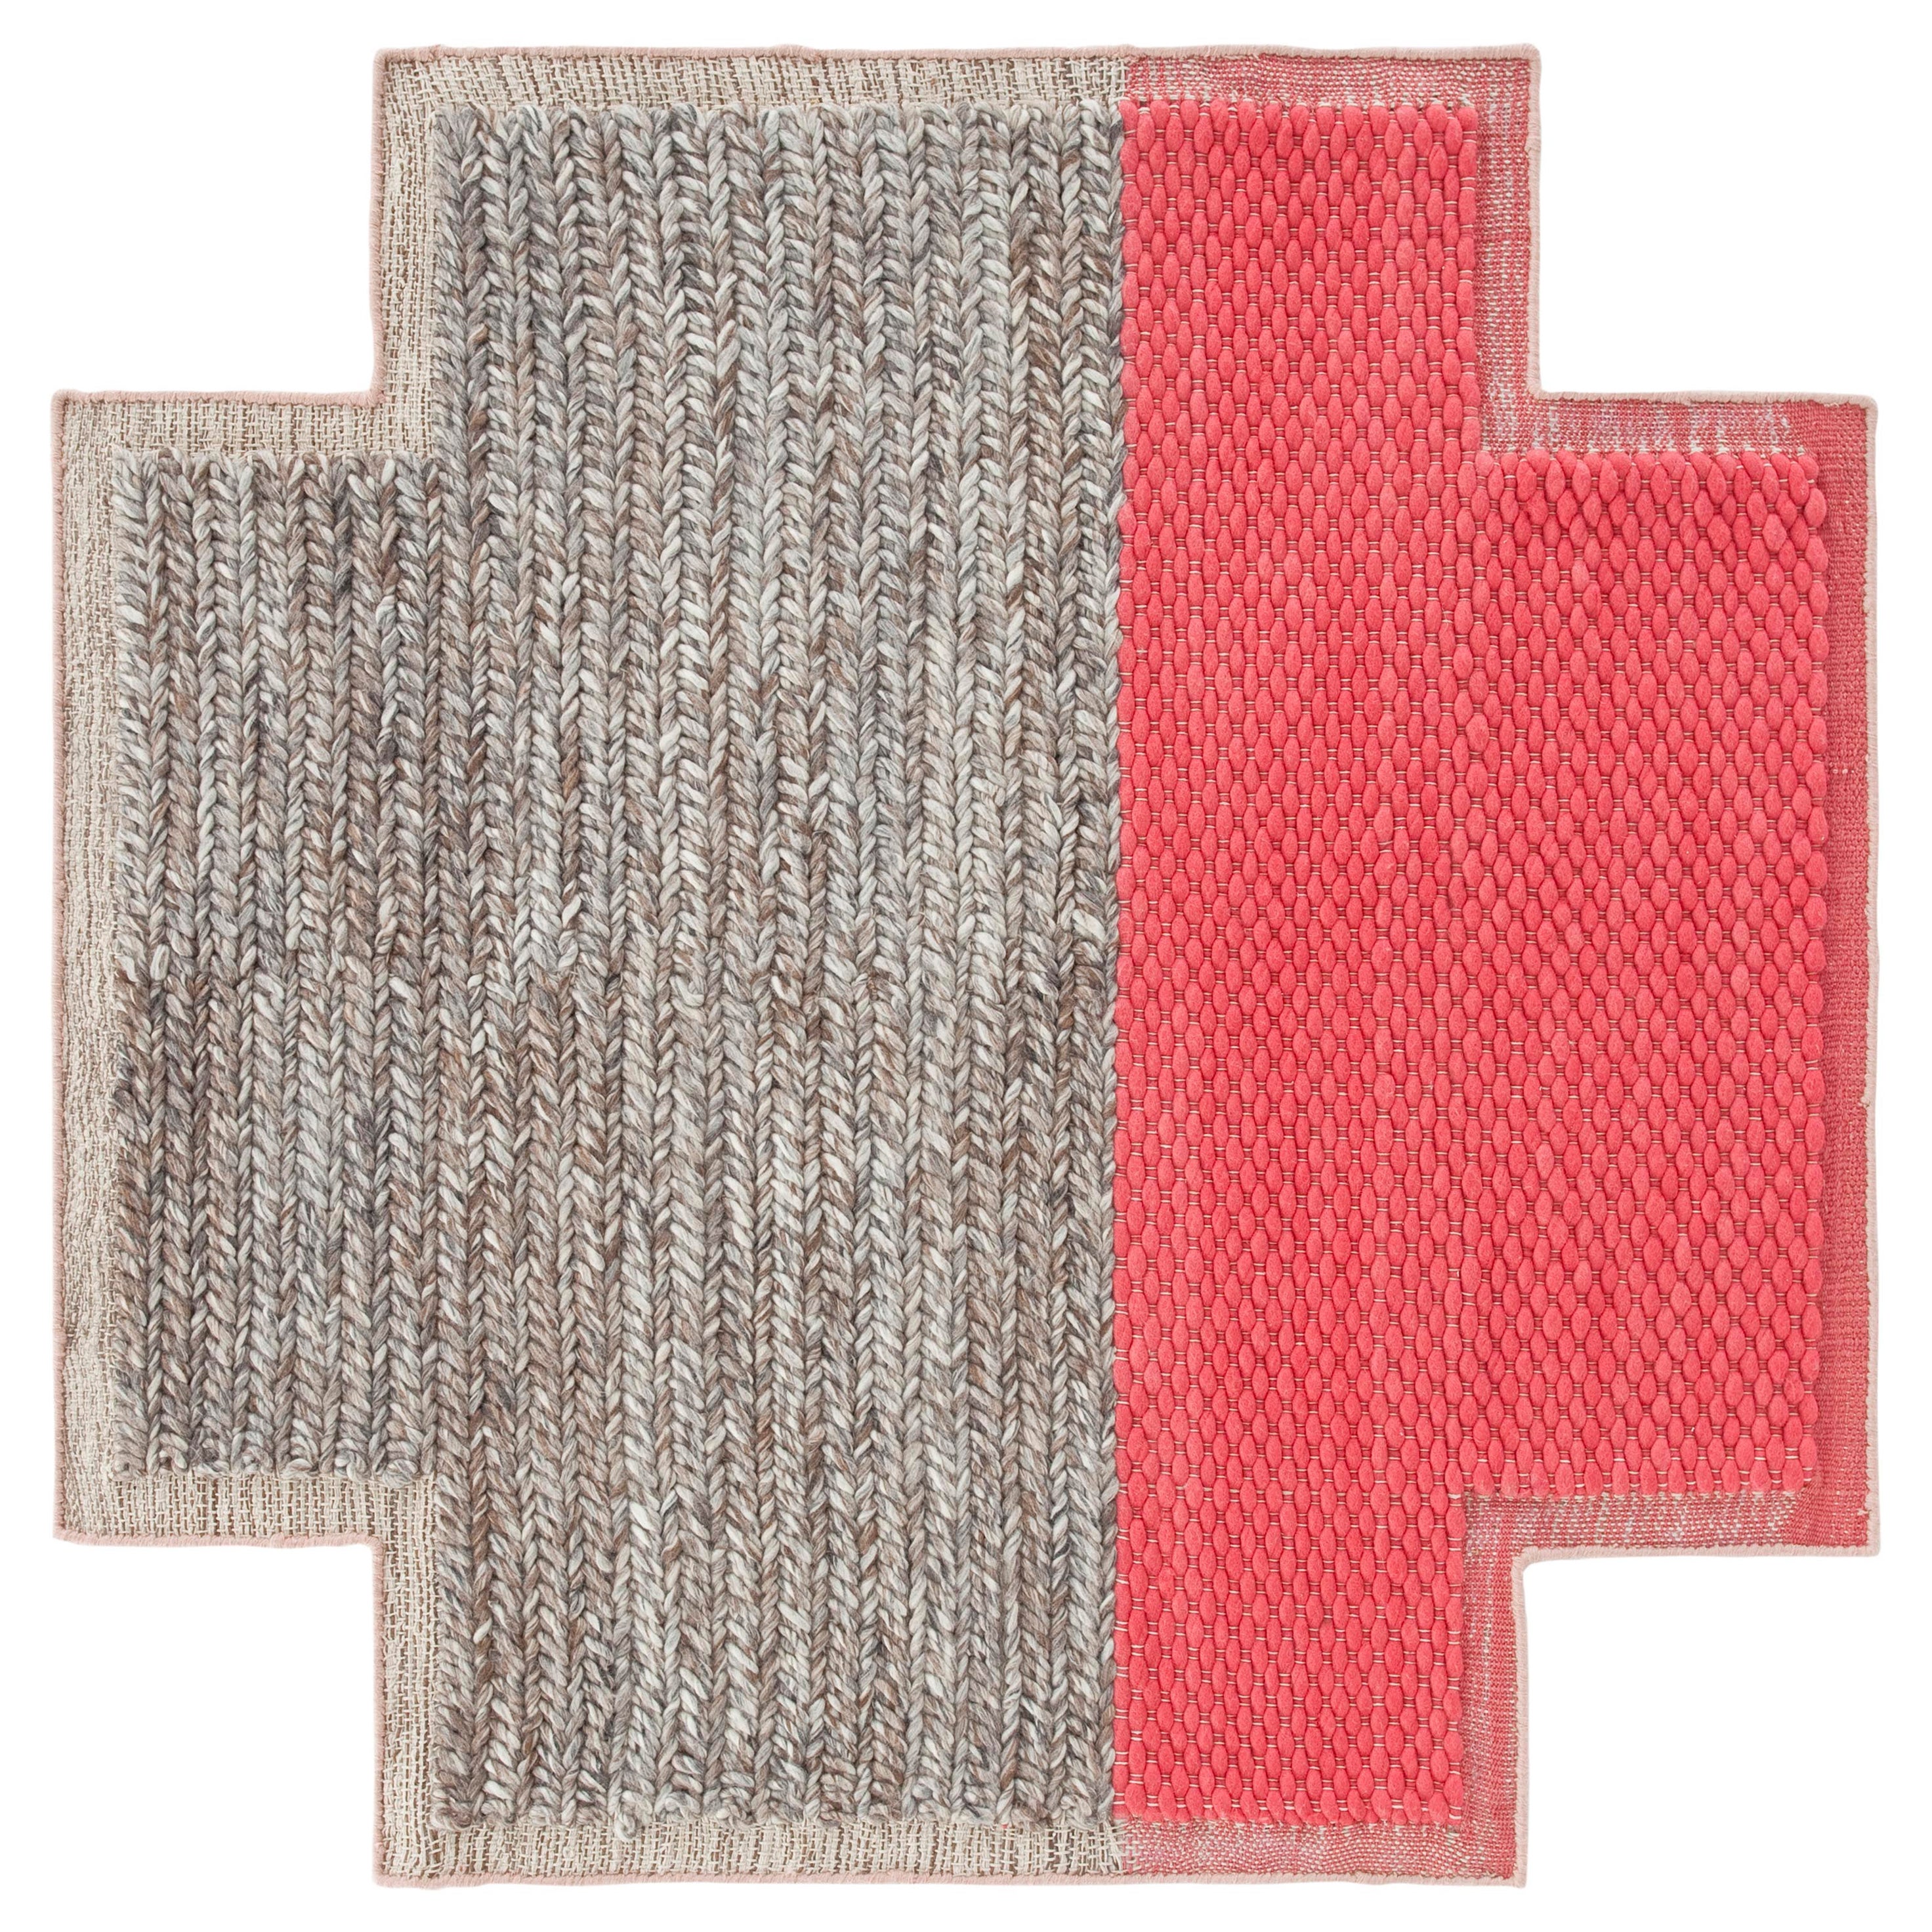 GAN Mangas Space Small Square Rug Plait in Coral by Patricia Urquiola